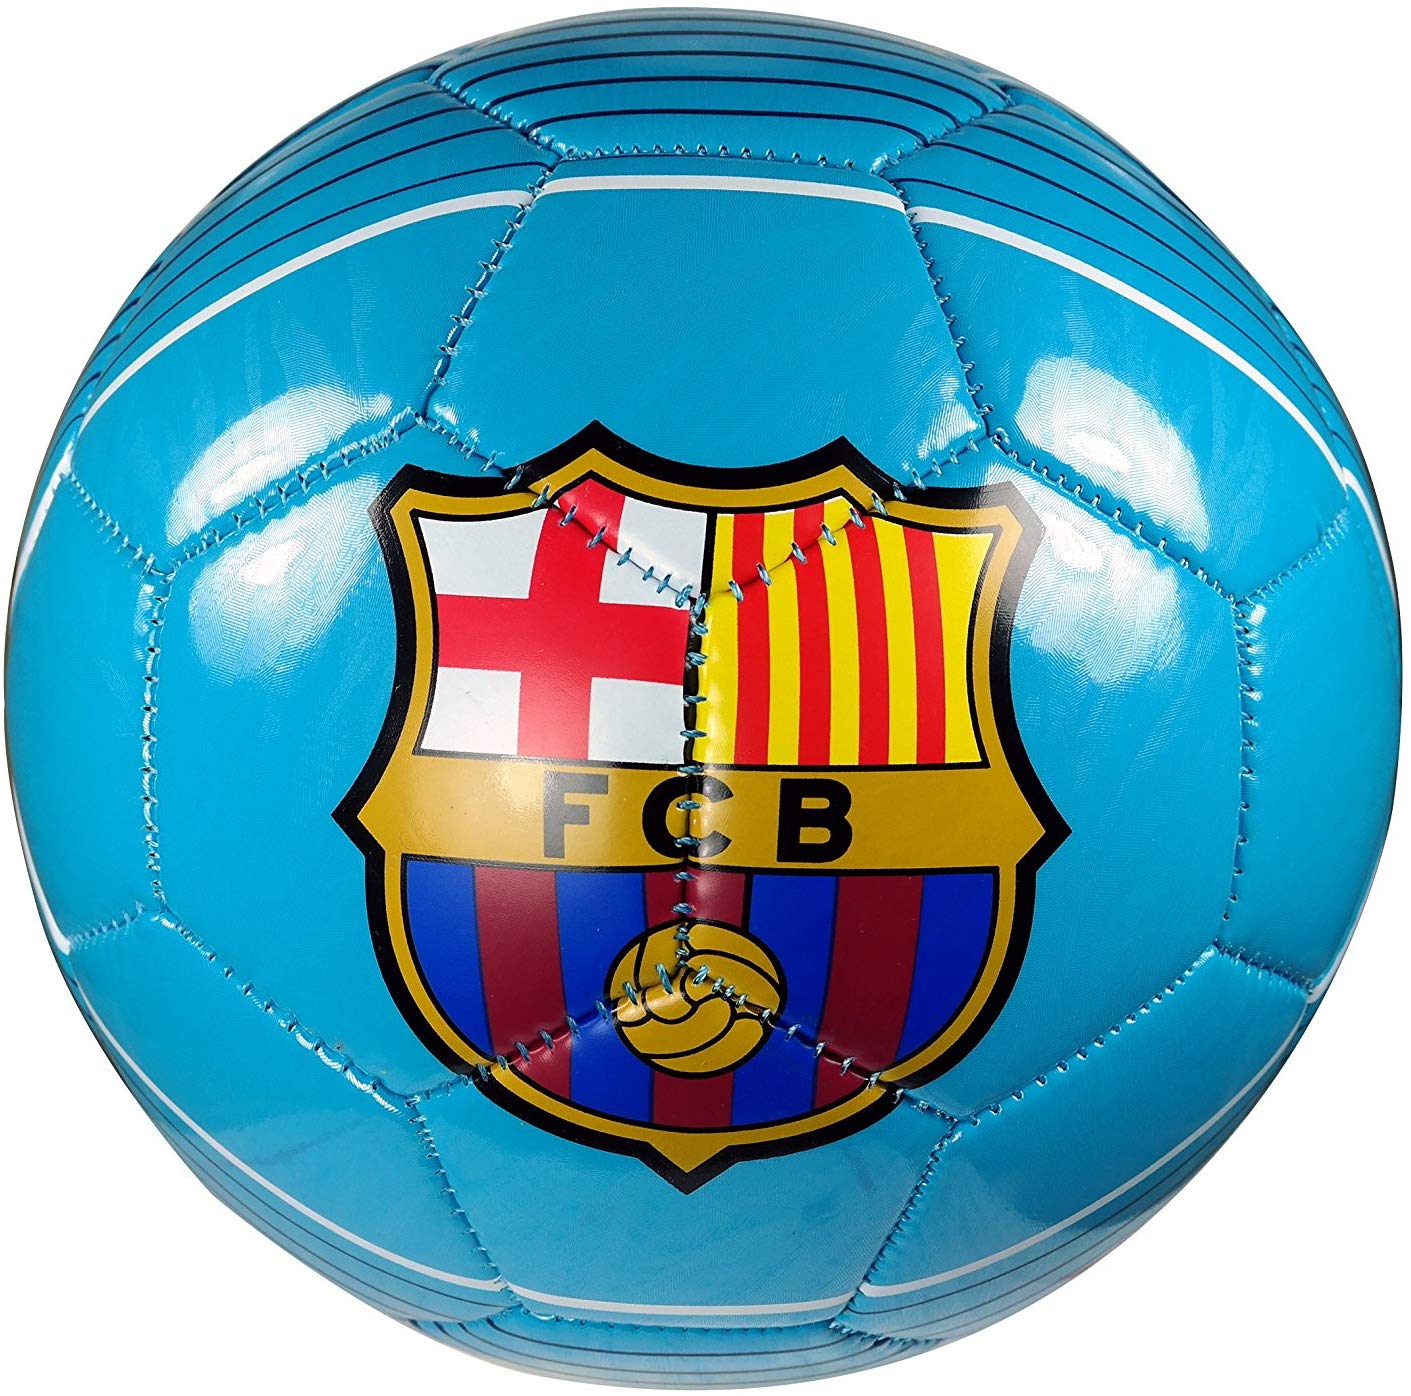 Icon Sports FC Barcelona Soccer Ball Officially Licensed Ball Size 2 01-4 - image 1 of 2